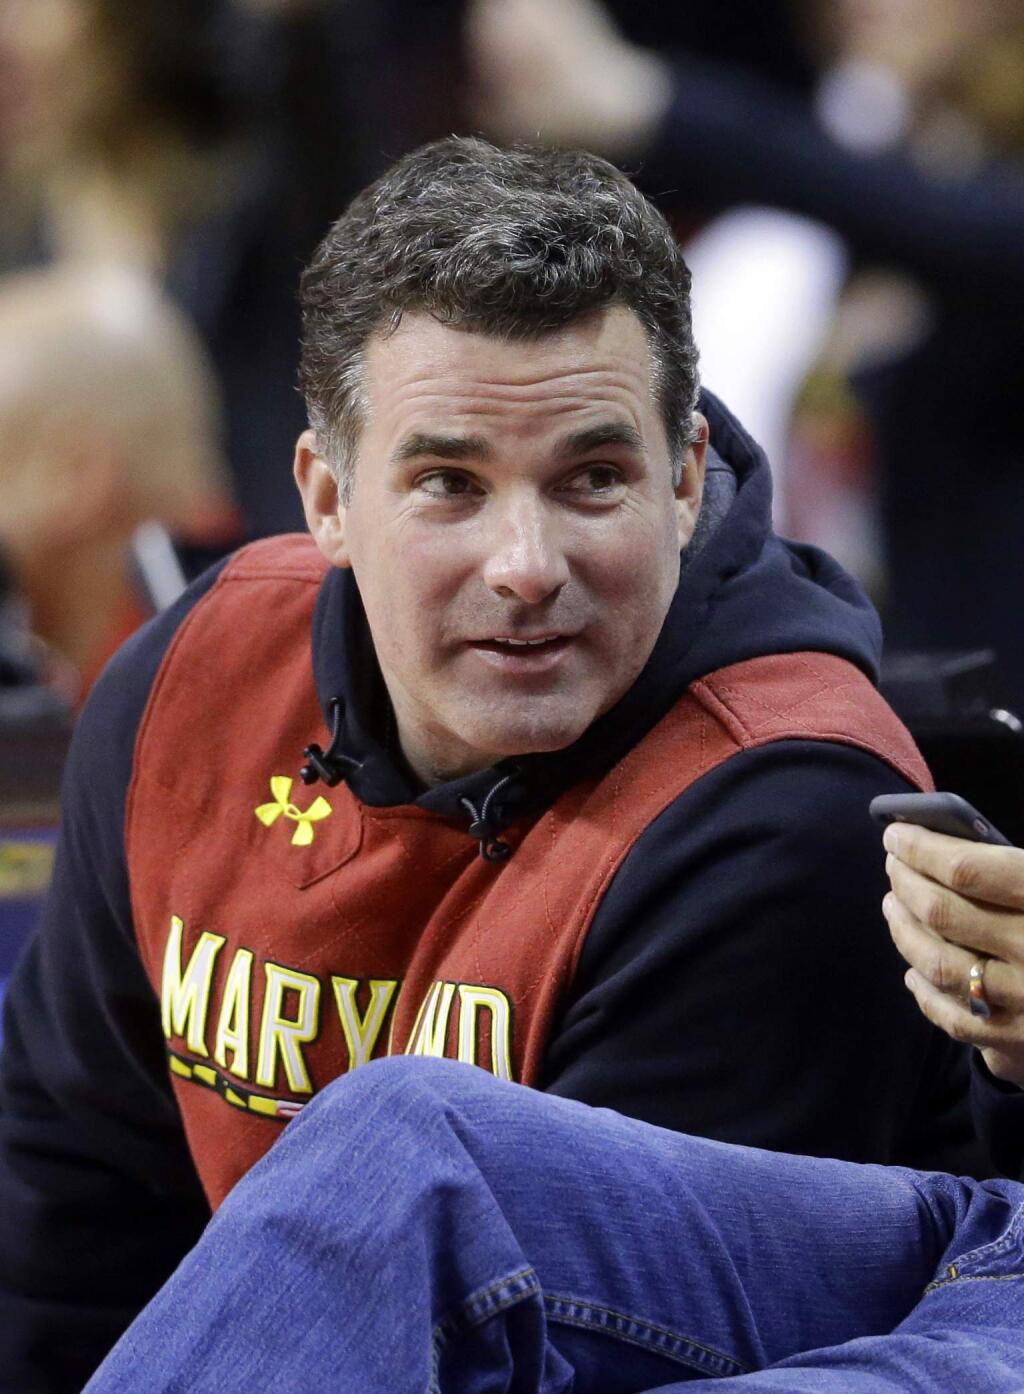 In this Saturday, Jan. 17, 2015 photo, Under Armour founder Kevin Plank sits courtside during the second half of an NCAA college basketball game between Maryland and Michigan State, in College Park, Md. Plank, is responding to criticism he received after calling President Donald Trump 'an asset to the country.' Plank wrote an open letter to Baltimore published as a full-page advertisement in The Baltimore Sun Wednesday, Feb. 15, 2017. (AP Photo/Patrick Semansky)